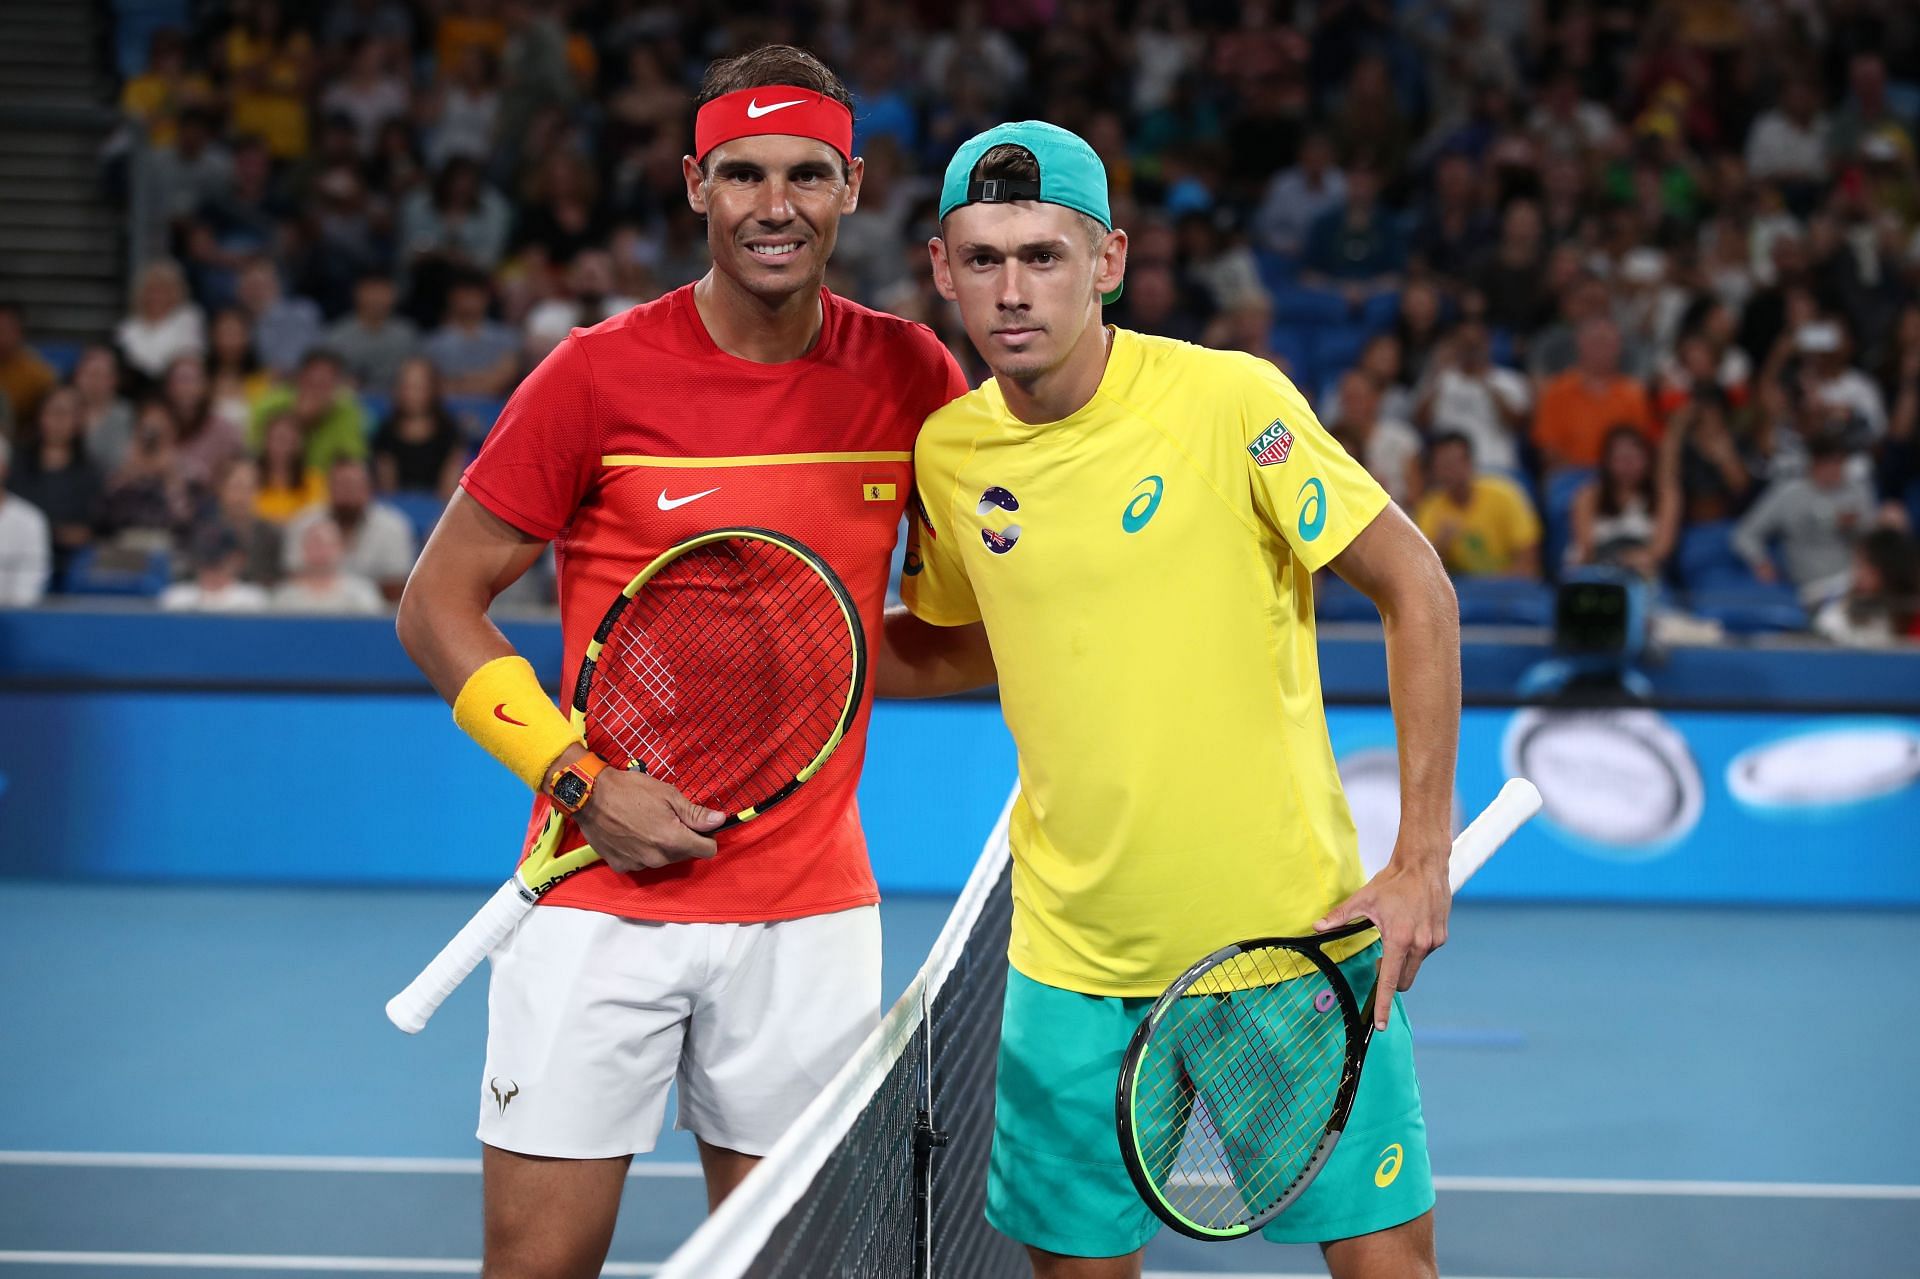 Rafael Nadal vs Alex de Minaur Where to watch, TV schedule, live streaming details and more United Cup 2023